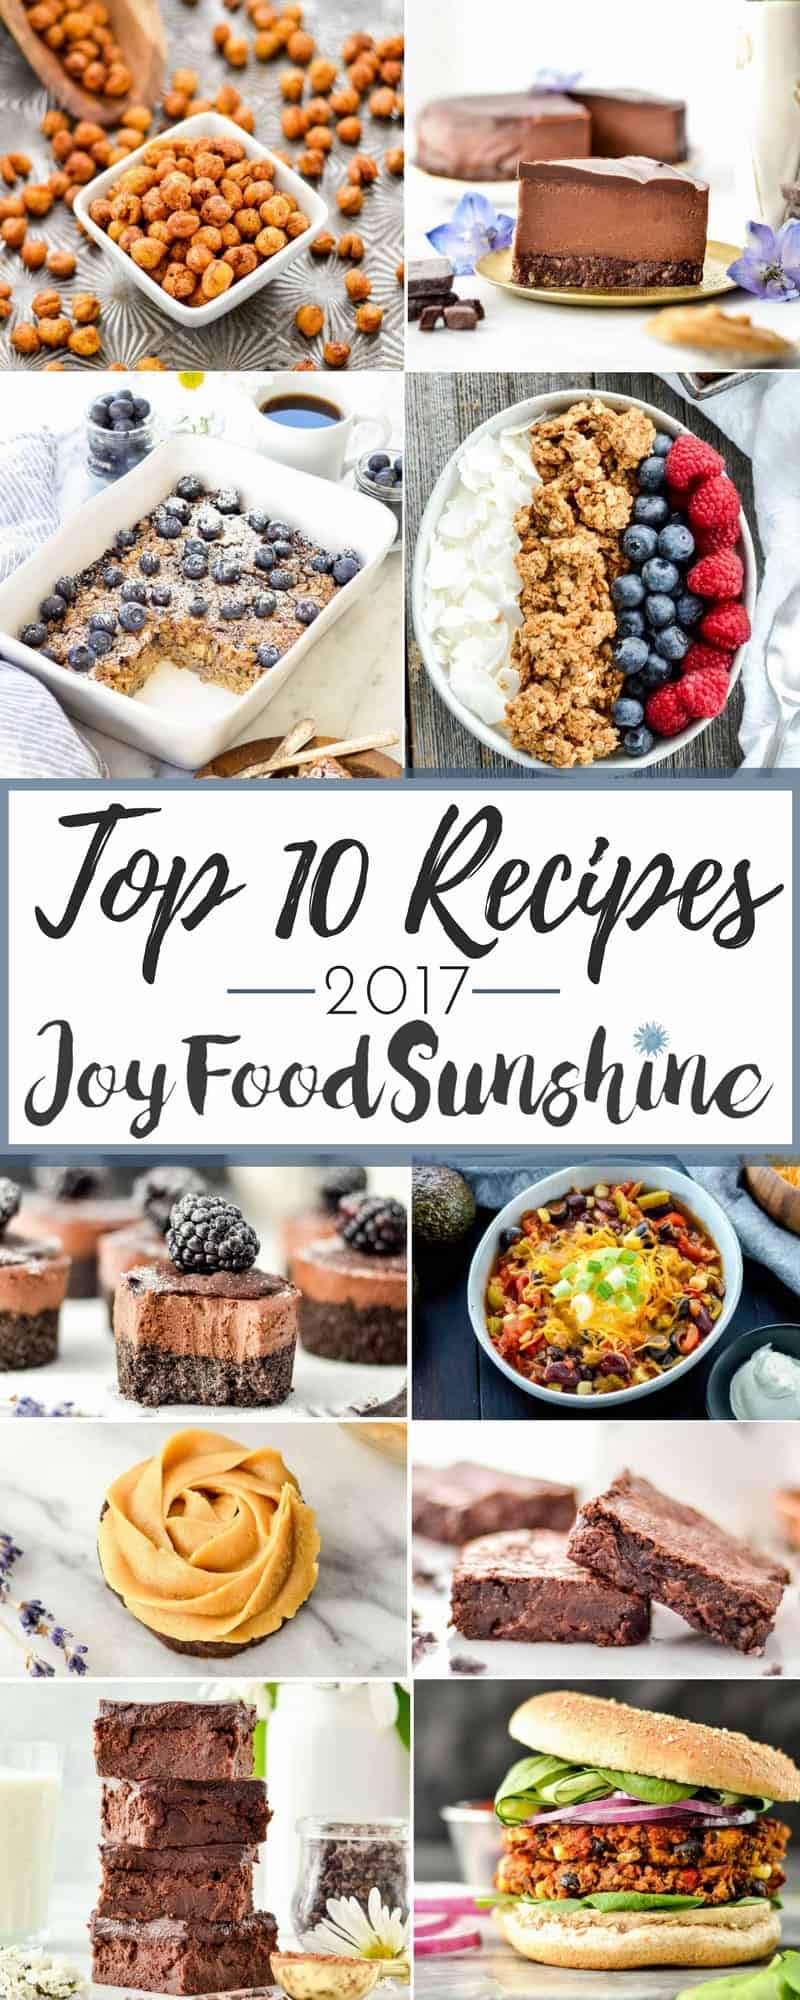 The Top 10 Recipes from JoyFoodSunshine 2017 most-loved by YOU!